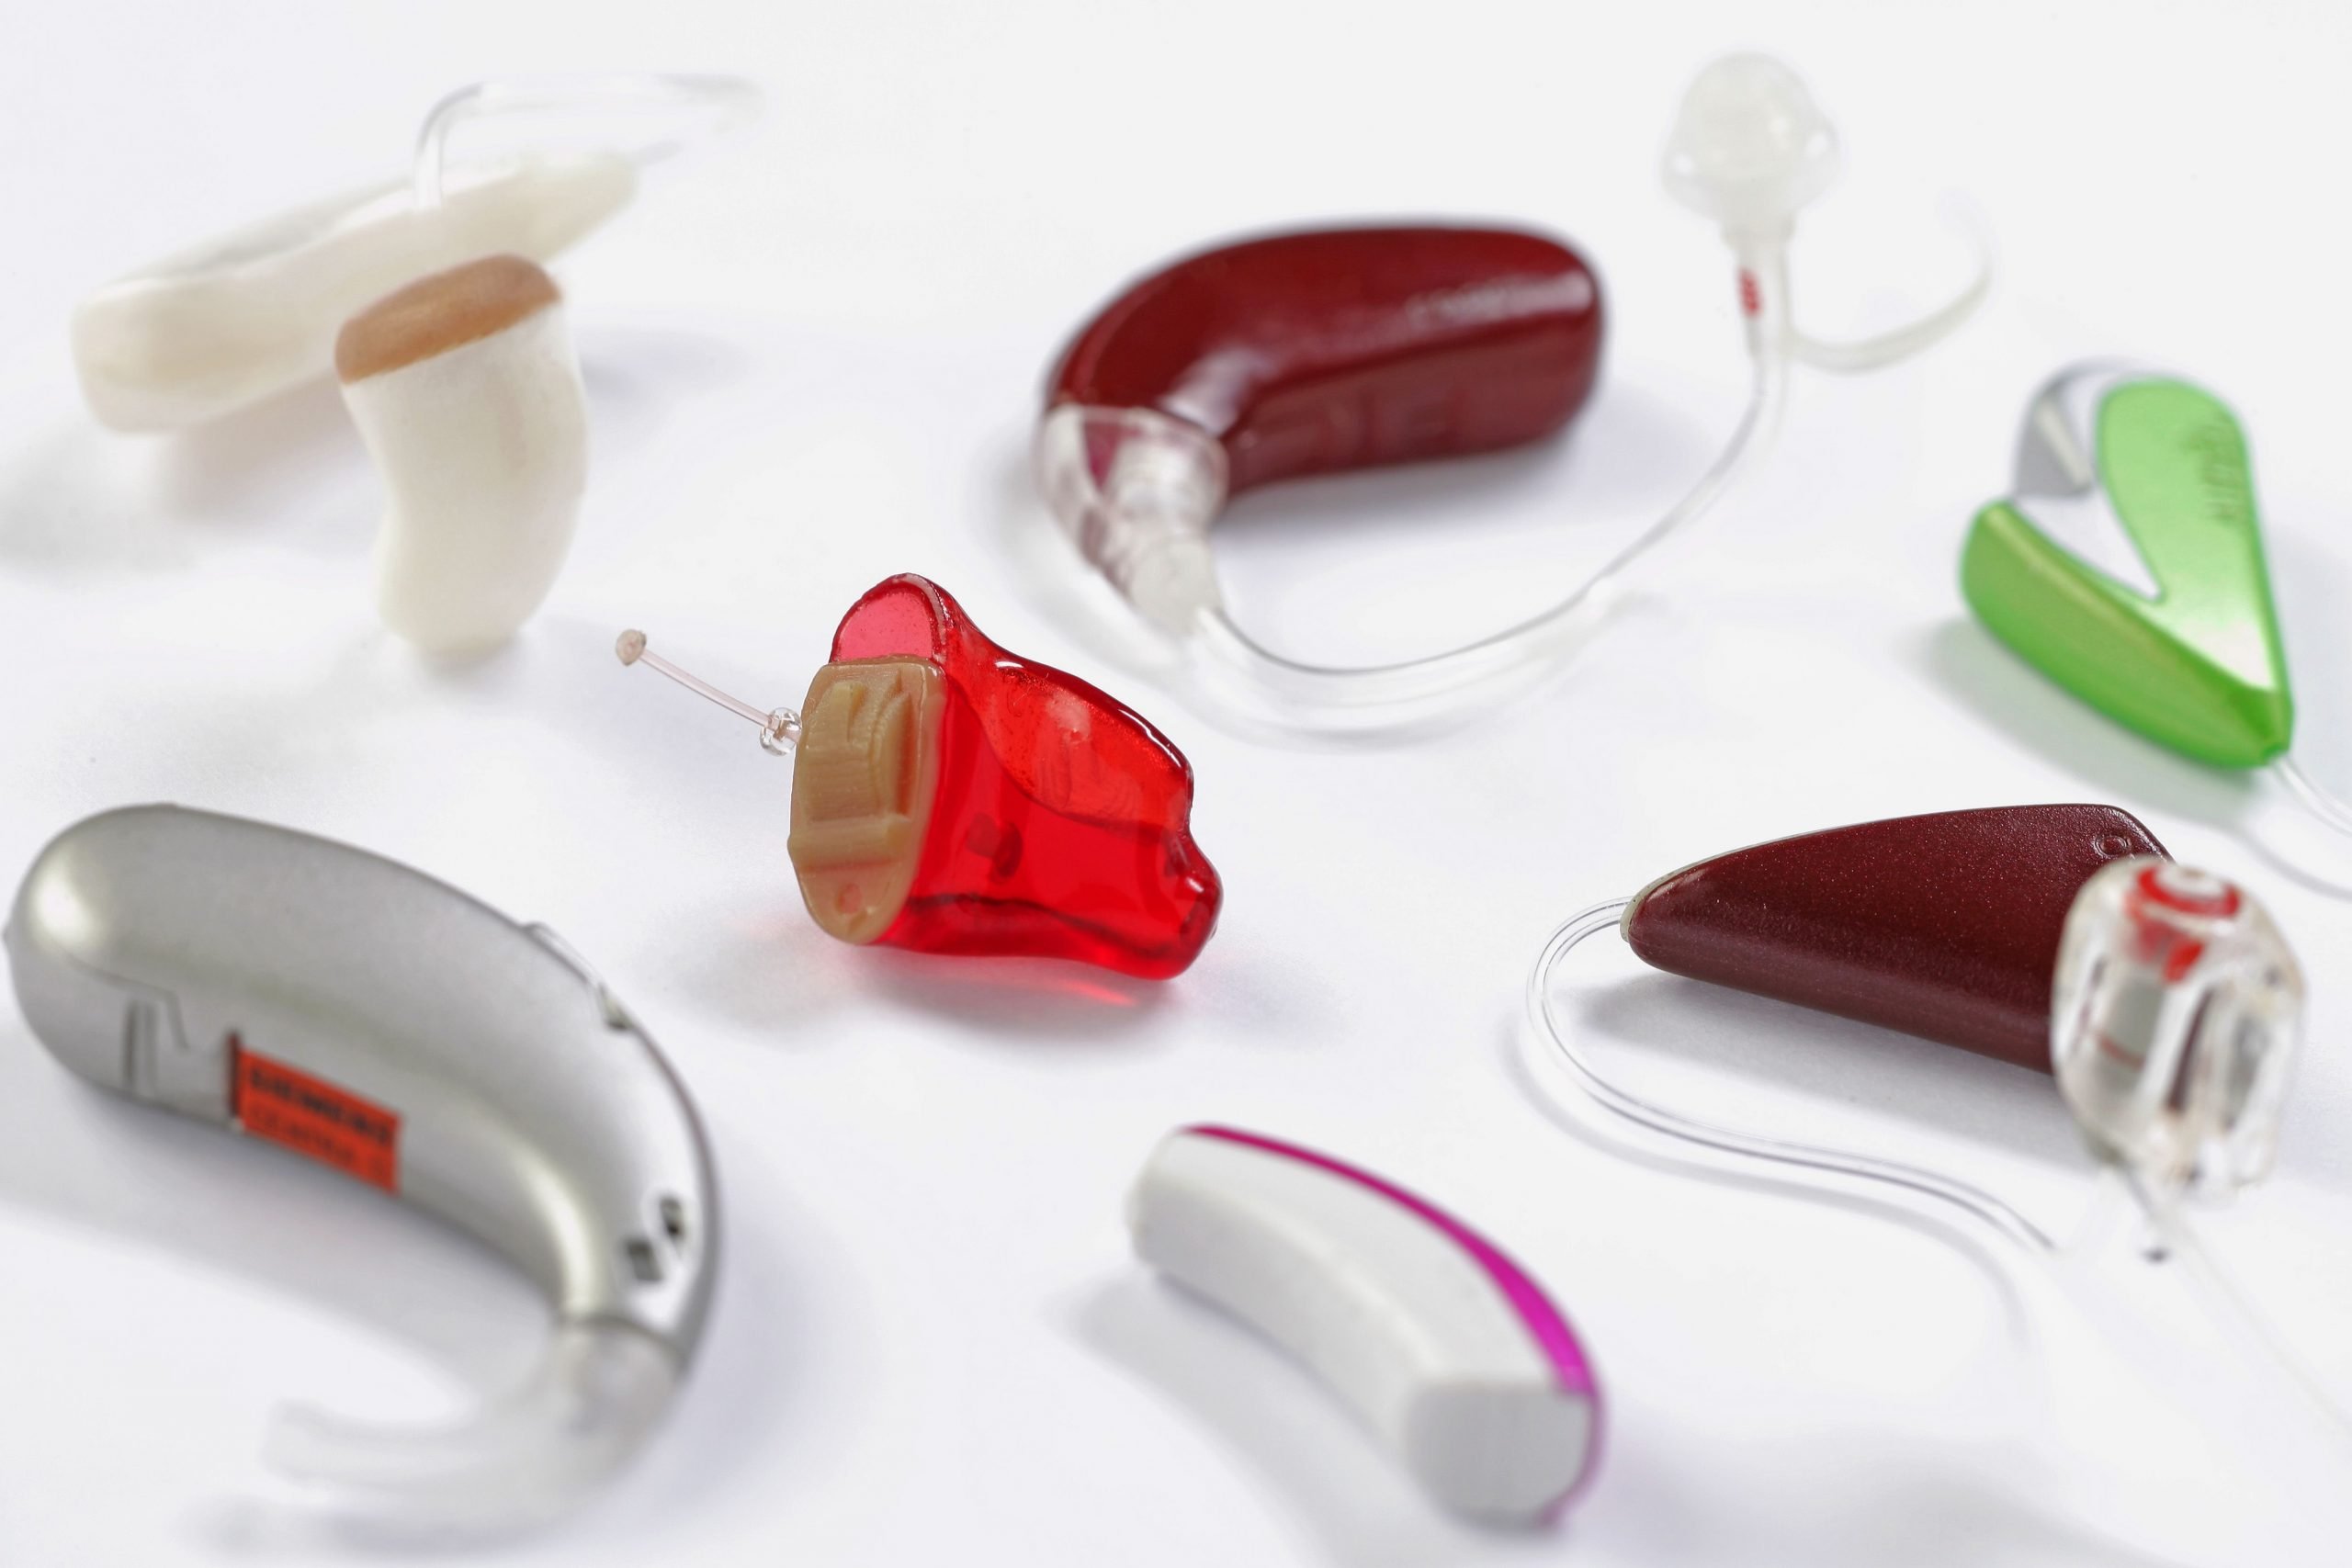 How to Donate Used Hearing Aids